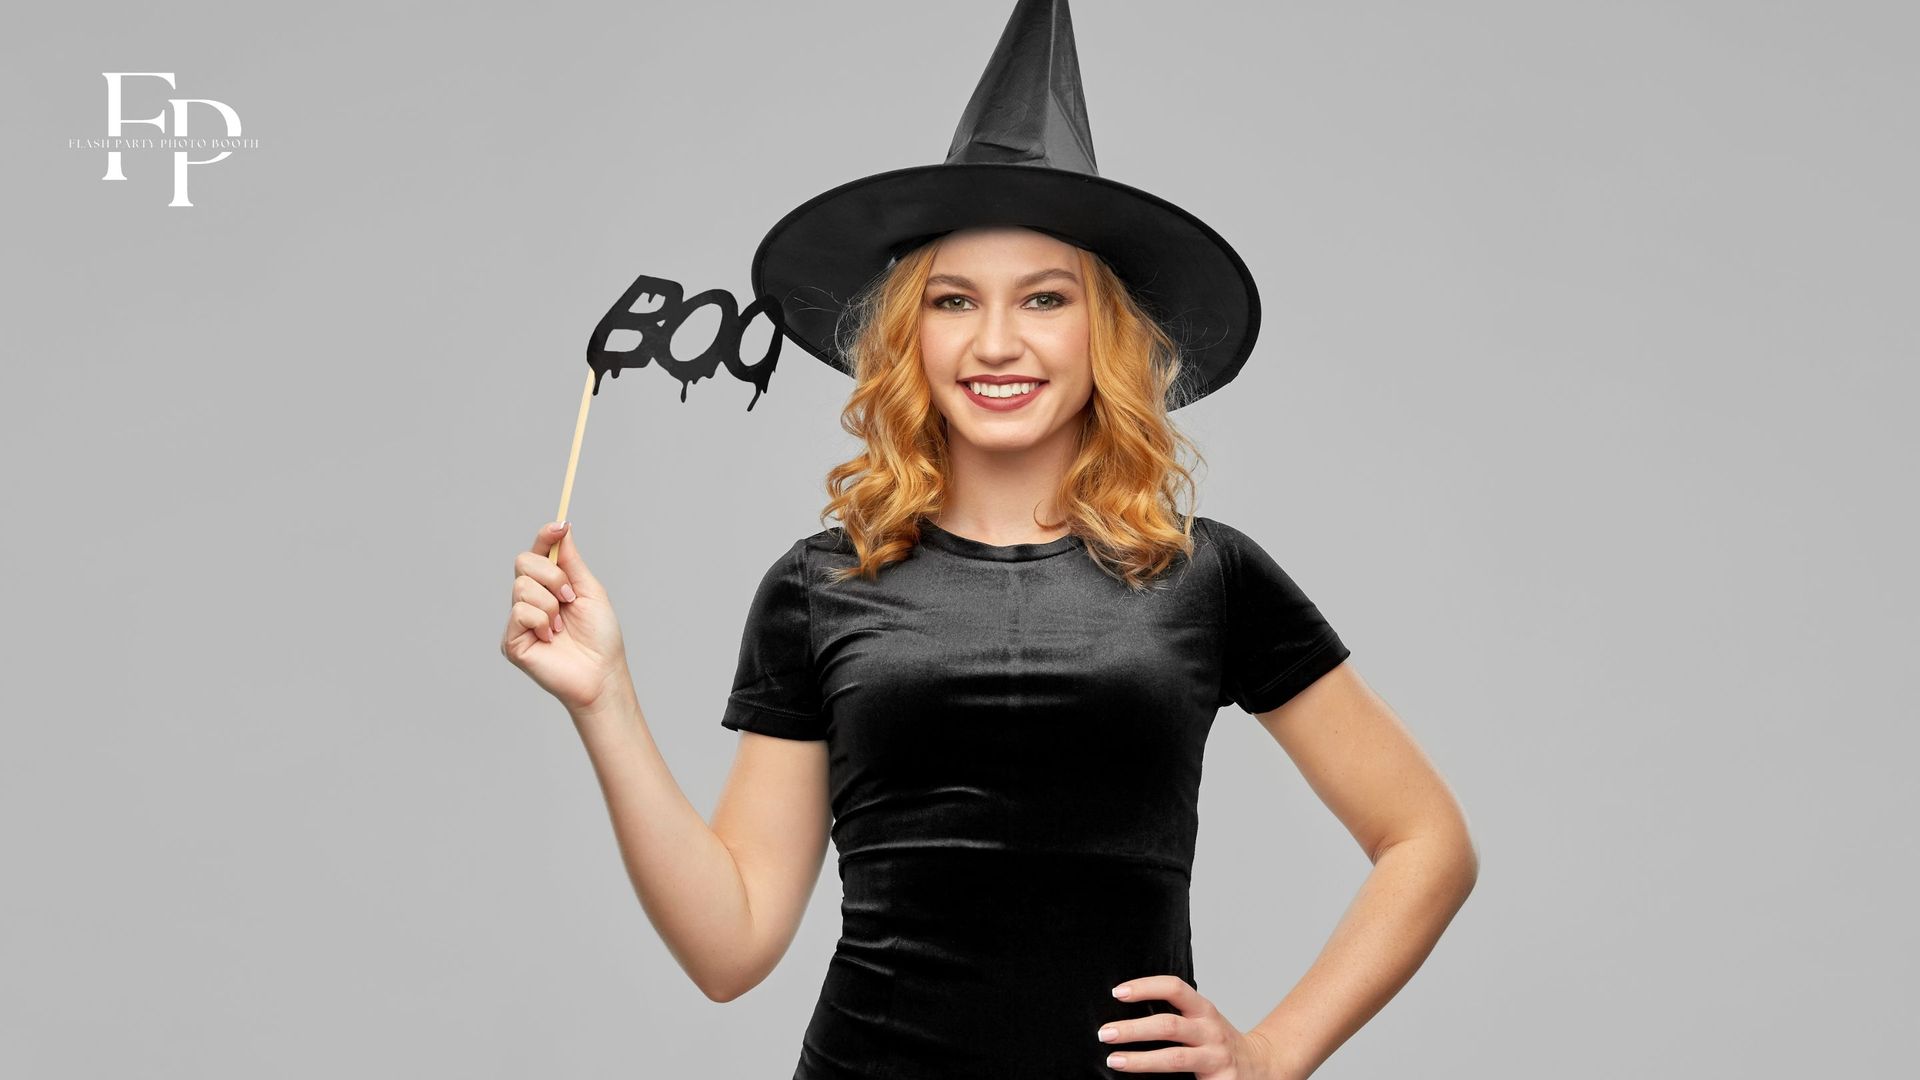 A woman striking her best Halloween pose at a photo booth rental